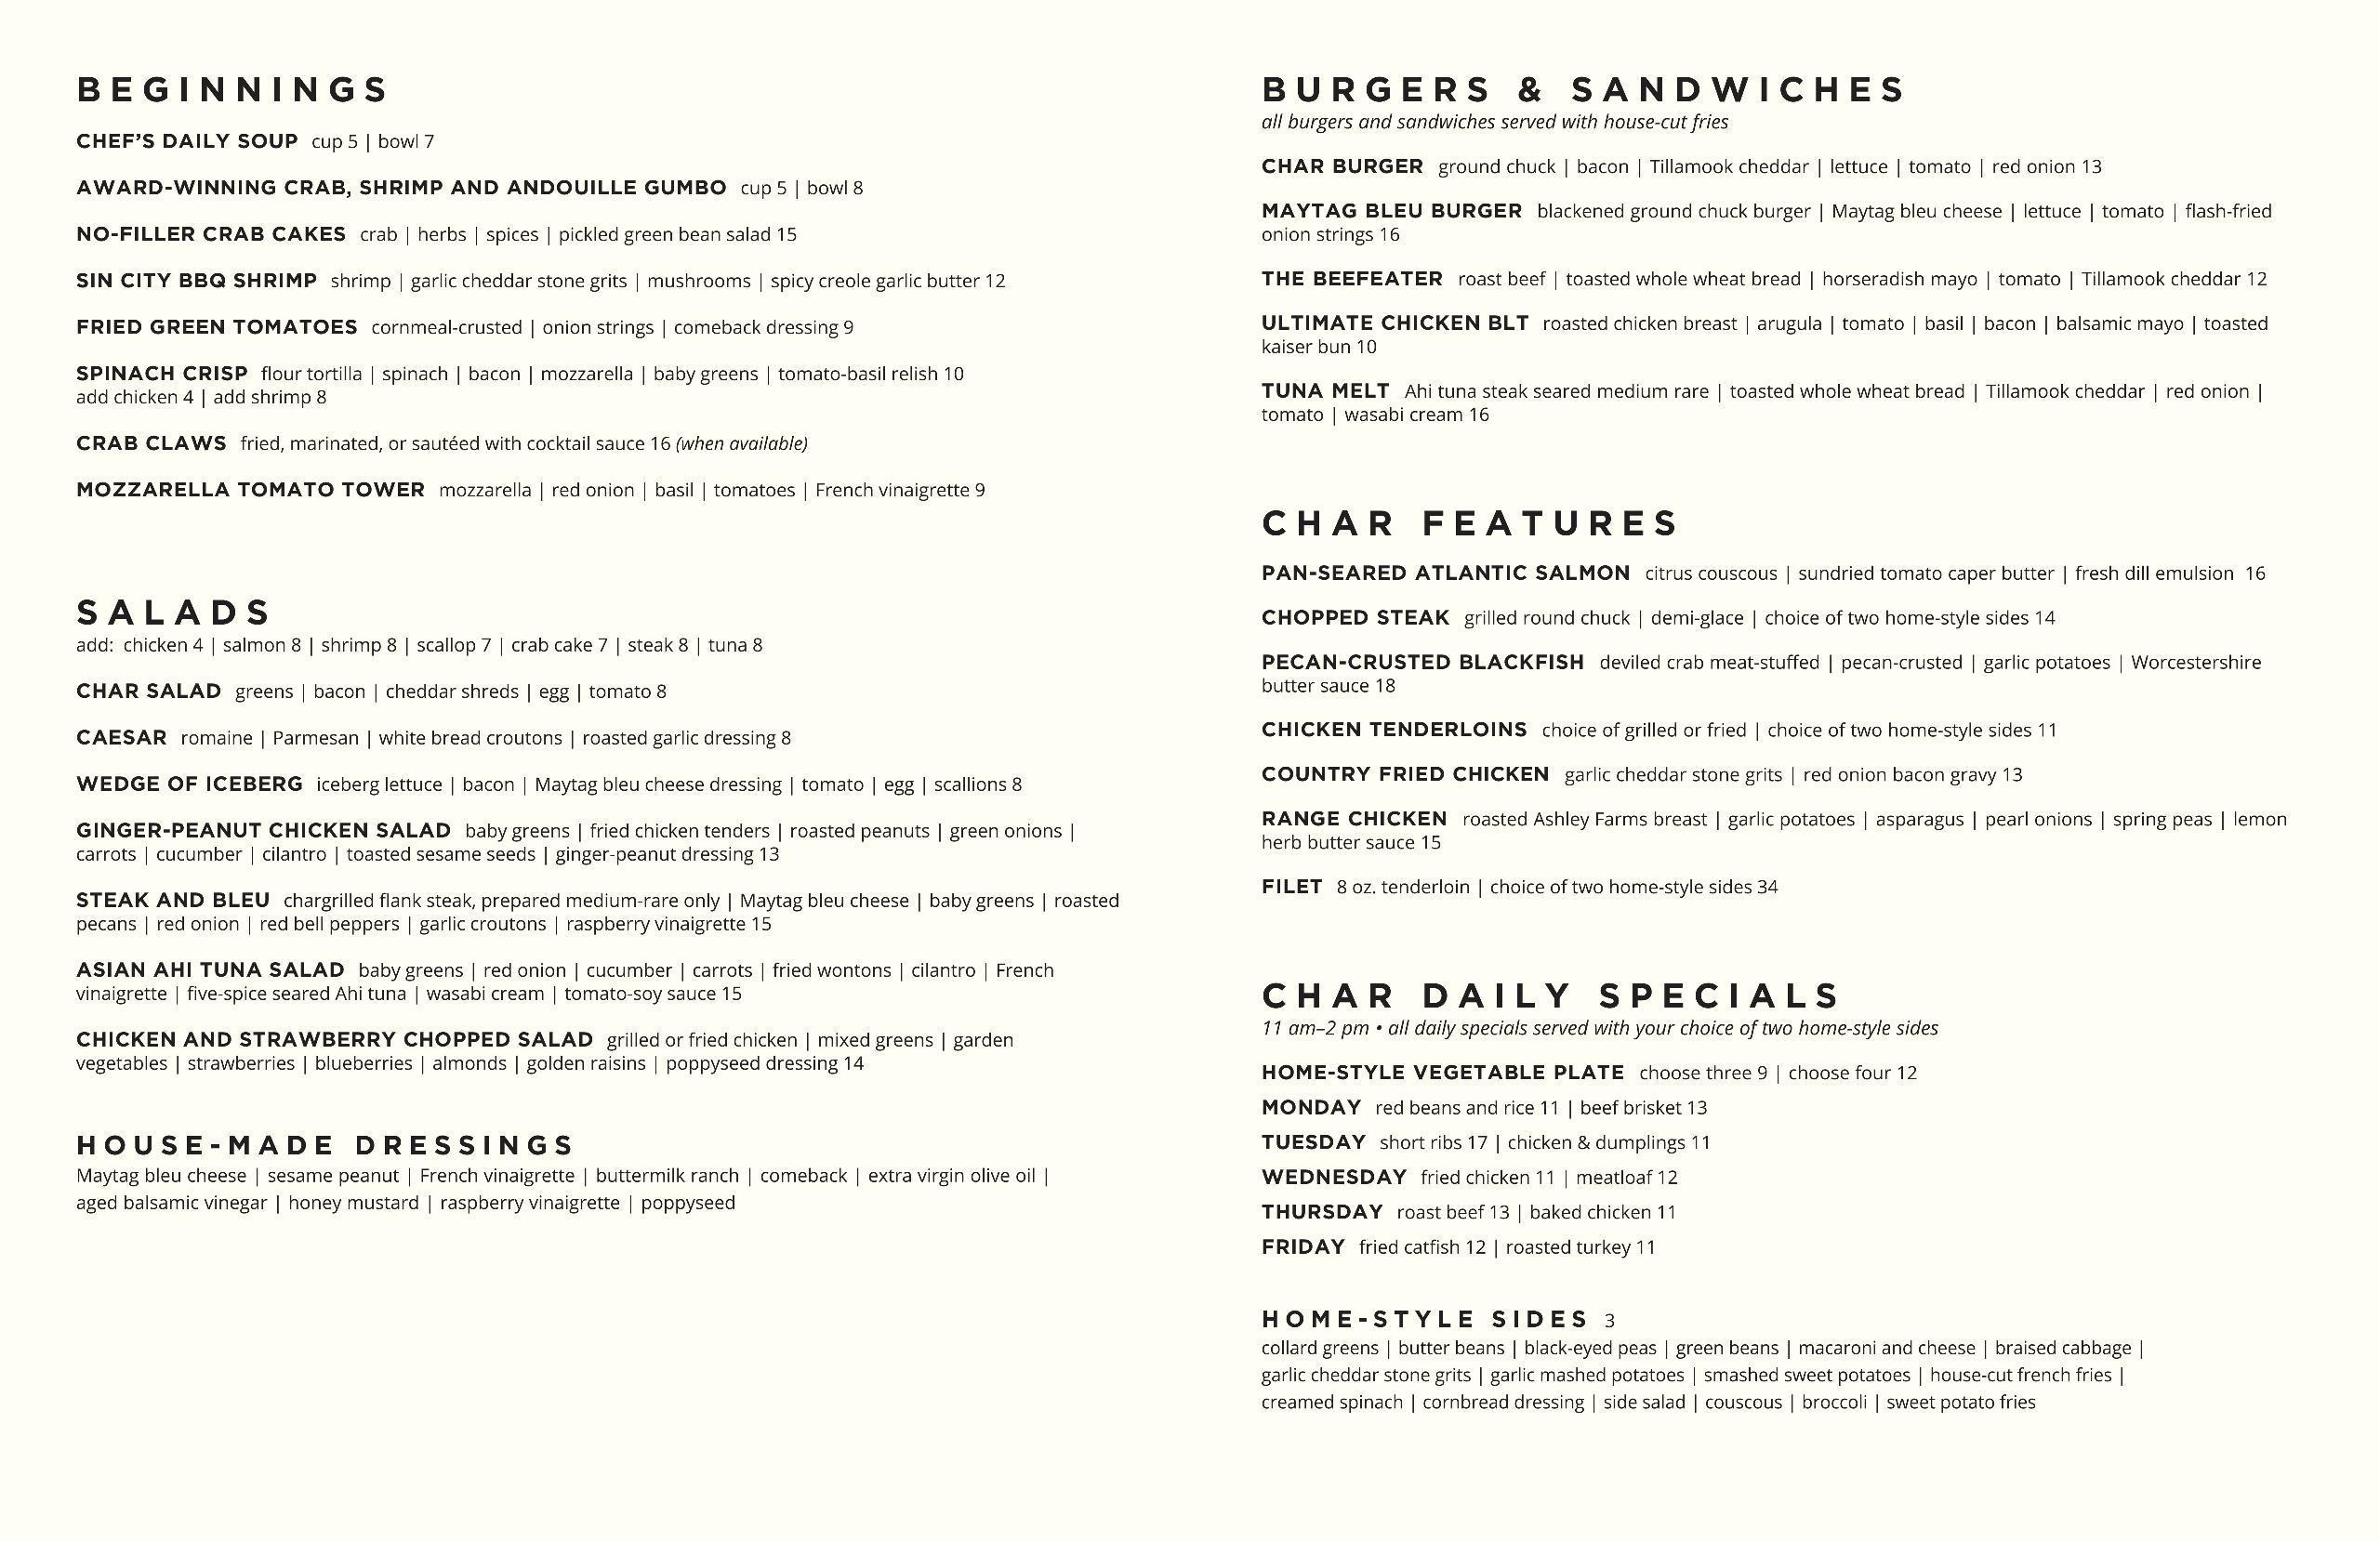 Char menu with prices